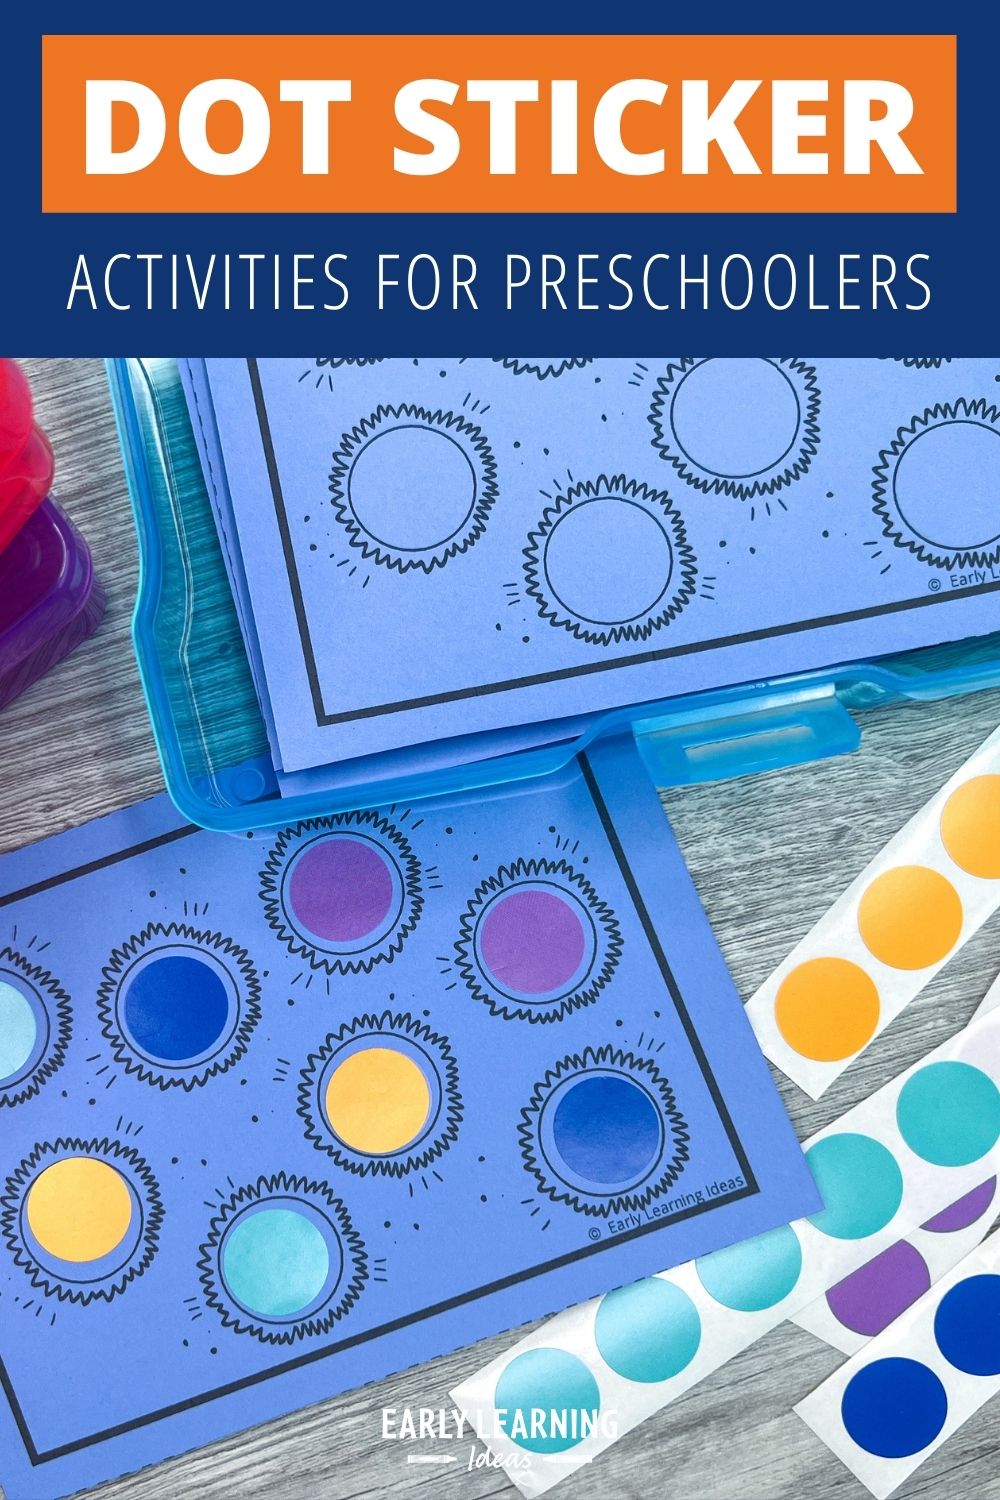 Dot sticker activities - a printable dot sticker task card printed on blue paper with purple, blue, orange, and teal dot stickers.